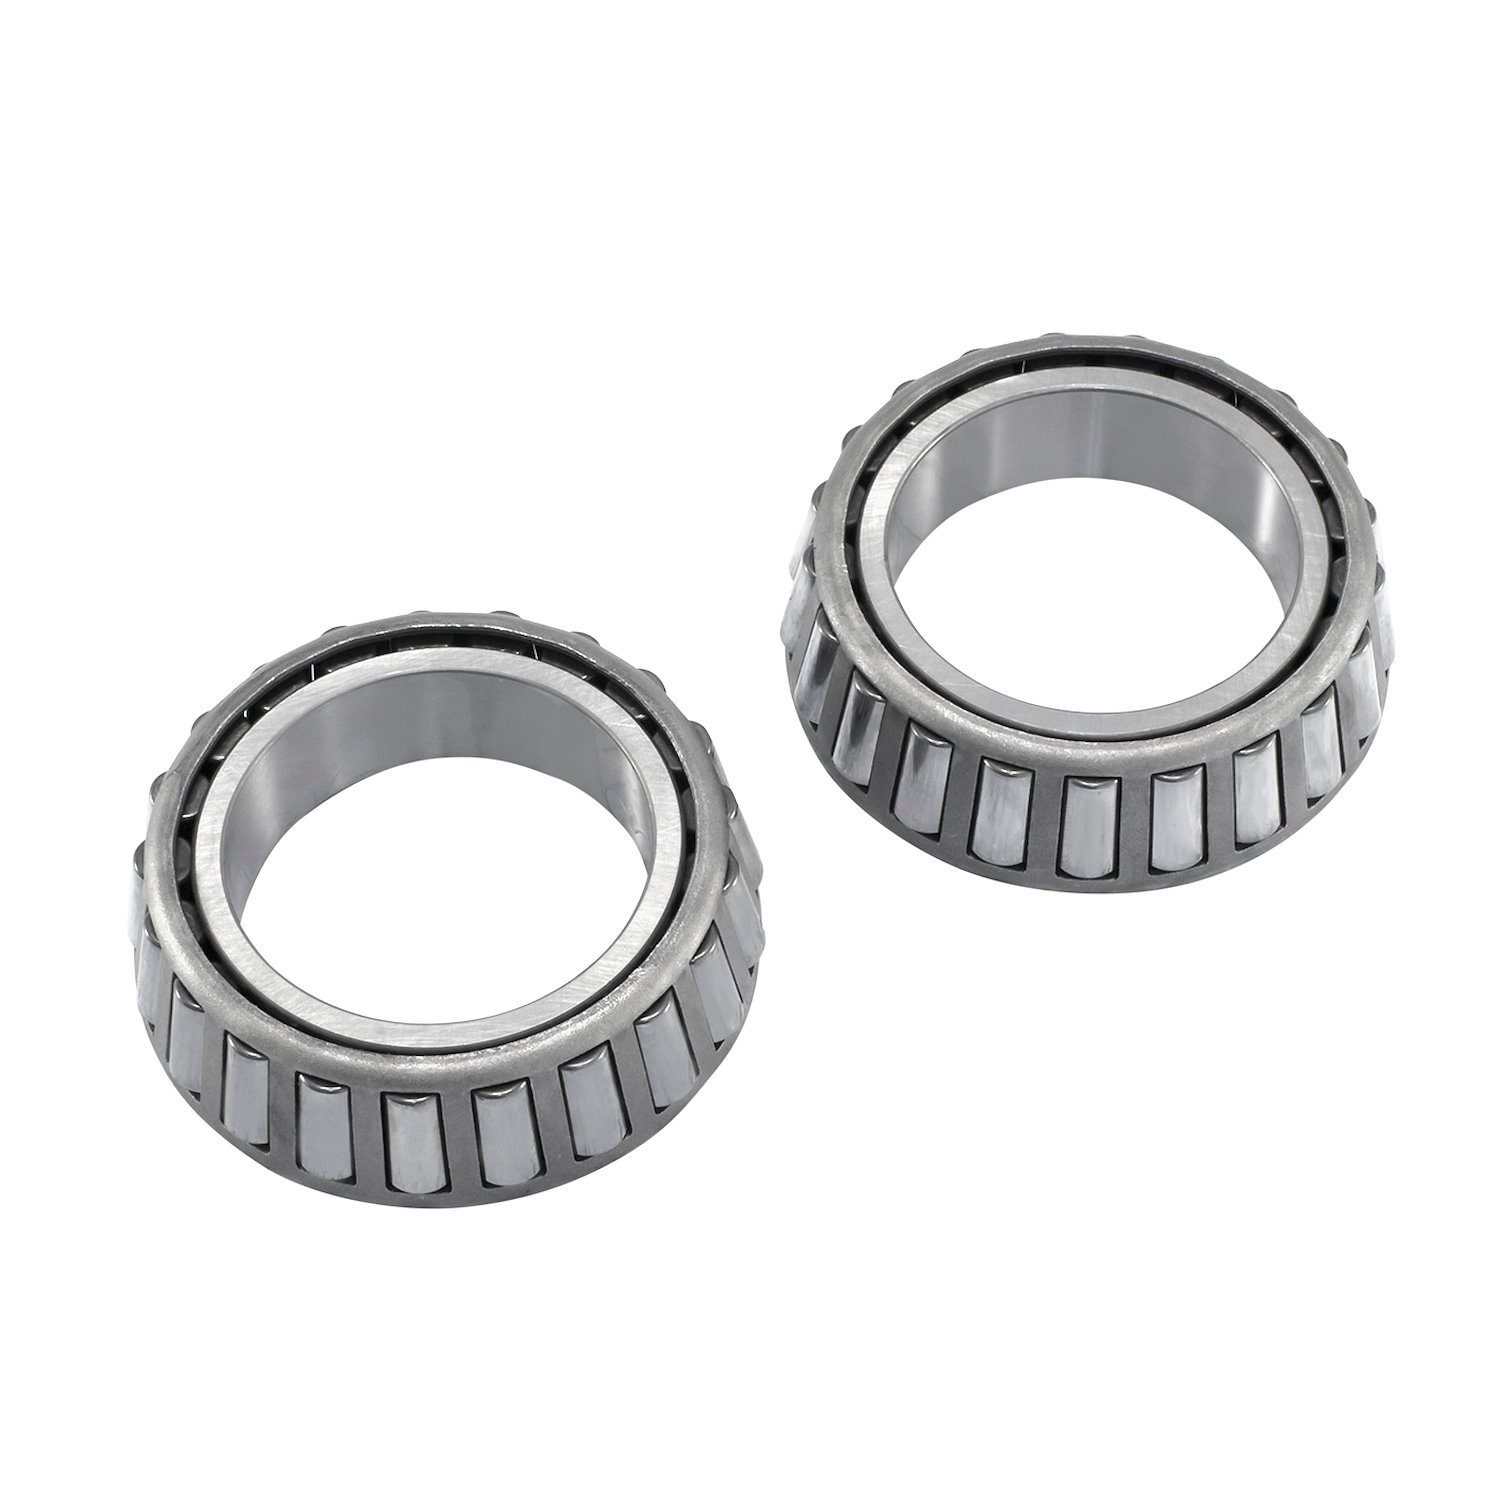 Carrier Setup Bearings For Dana 60 And Dana 70 Differentials